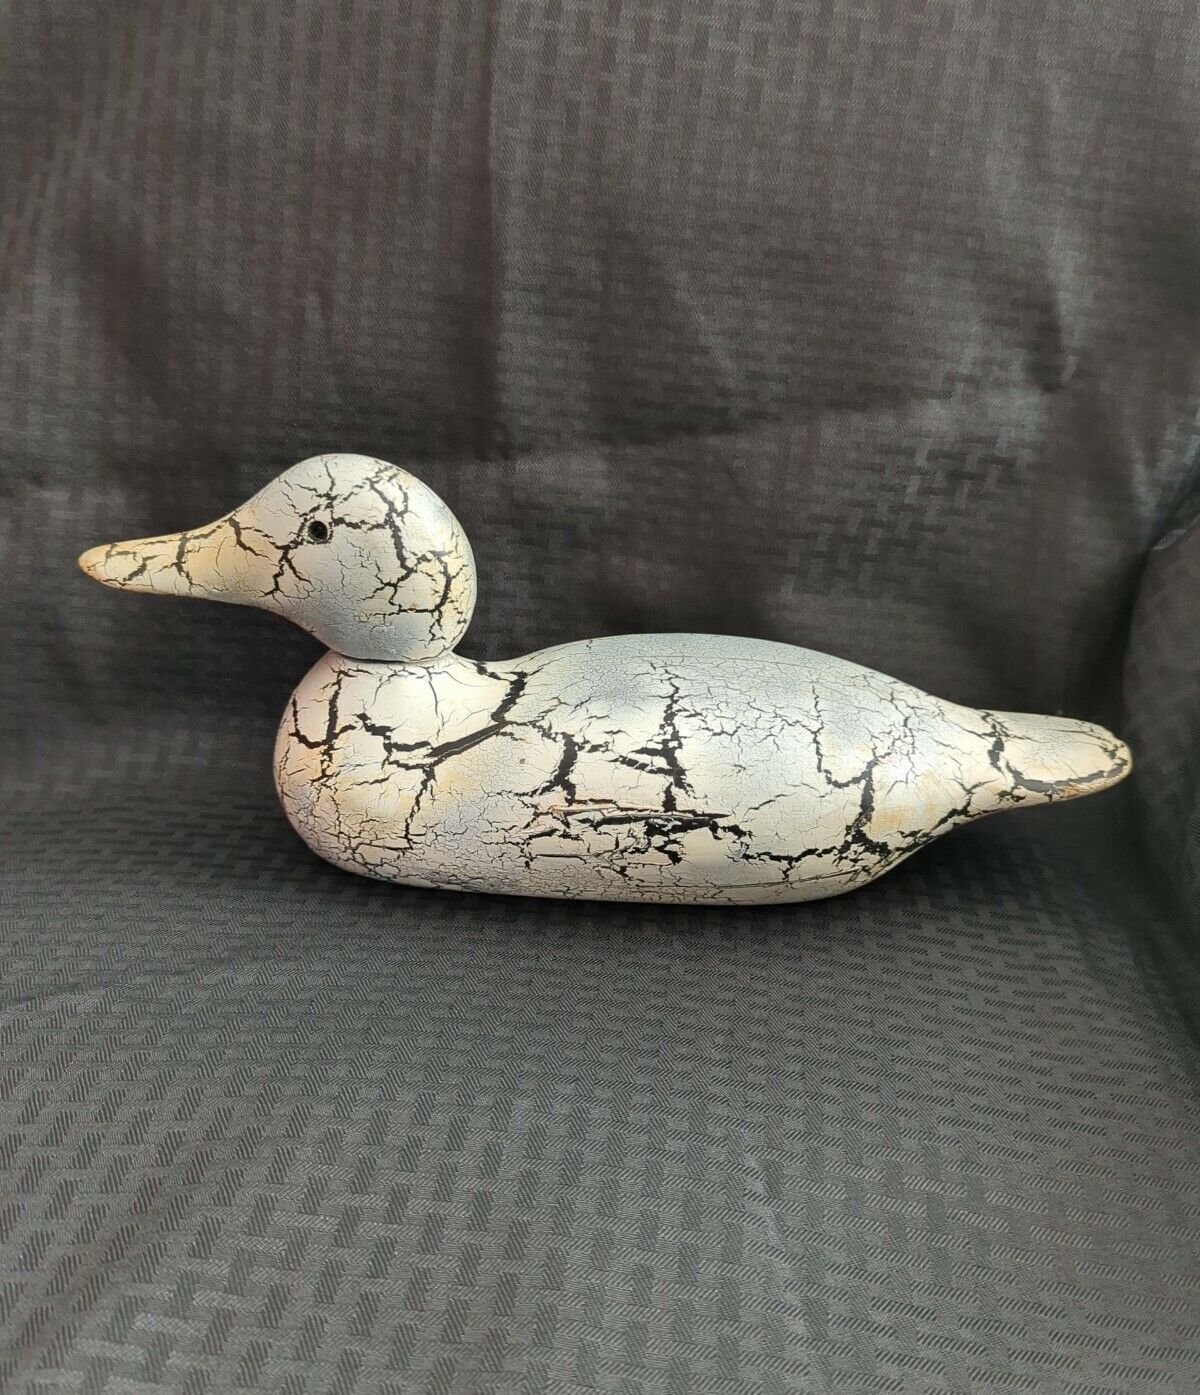 Vintage William Moseley Wooden Duck Decoy Crackle Finish 16 x 6 x 7 Signed WM